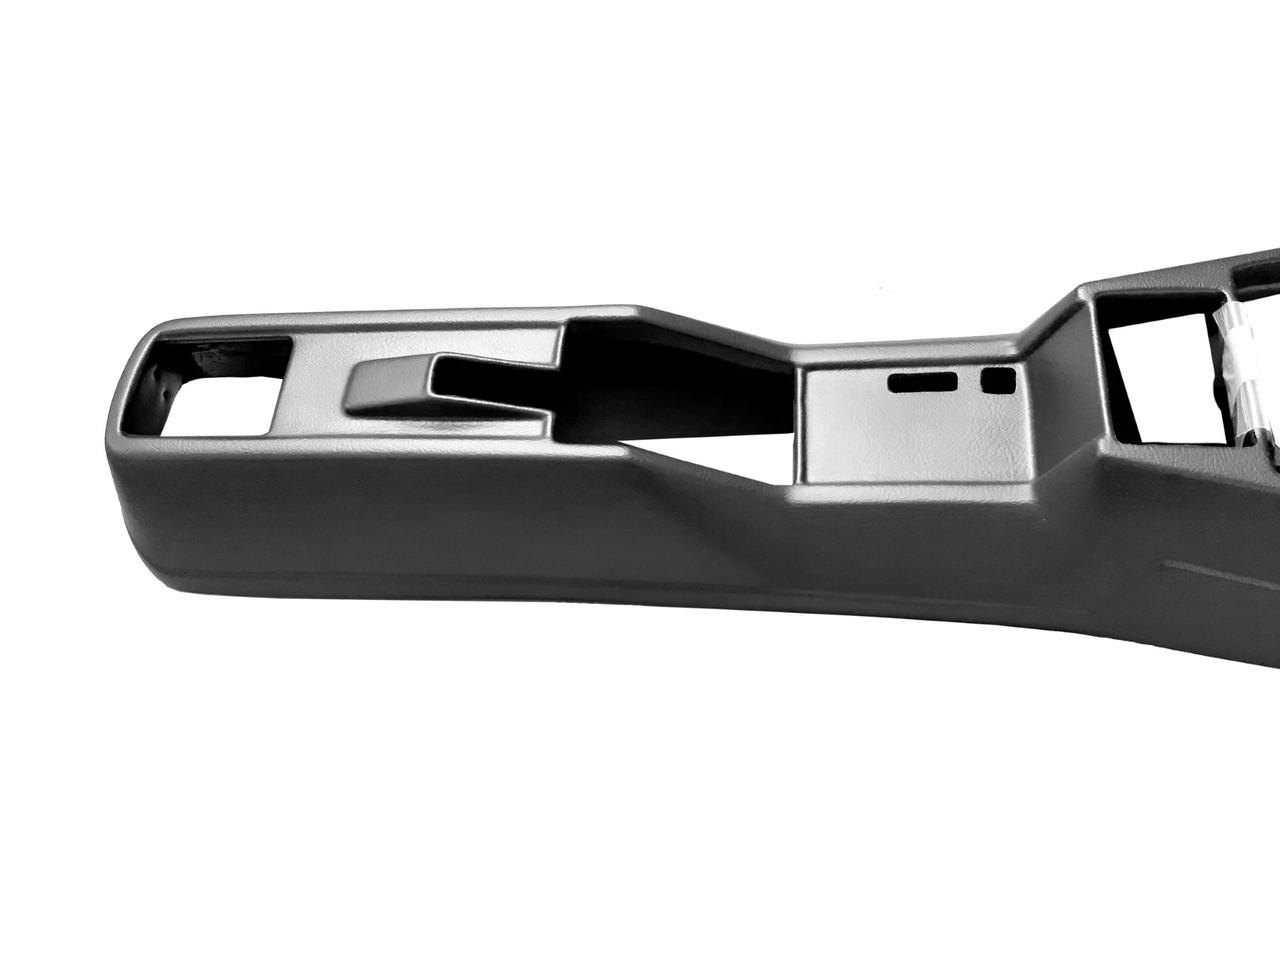 OE-type black center console - Soft touch, same feel and pattern as original
FIAT 124 and Spider 2000 - 1966-1982
- Auto Ricambi
RI5-428-OE, 5886845, 5886867, 5886715